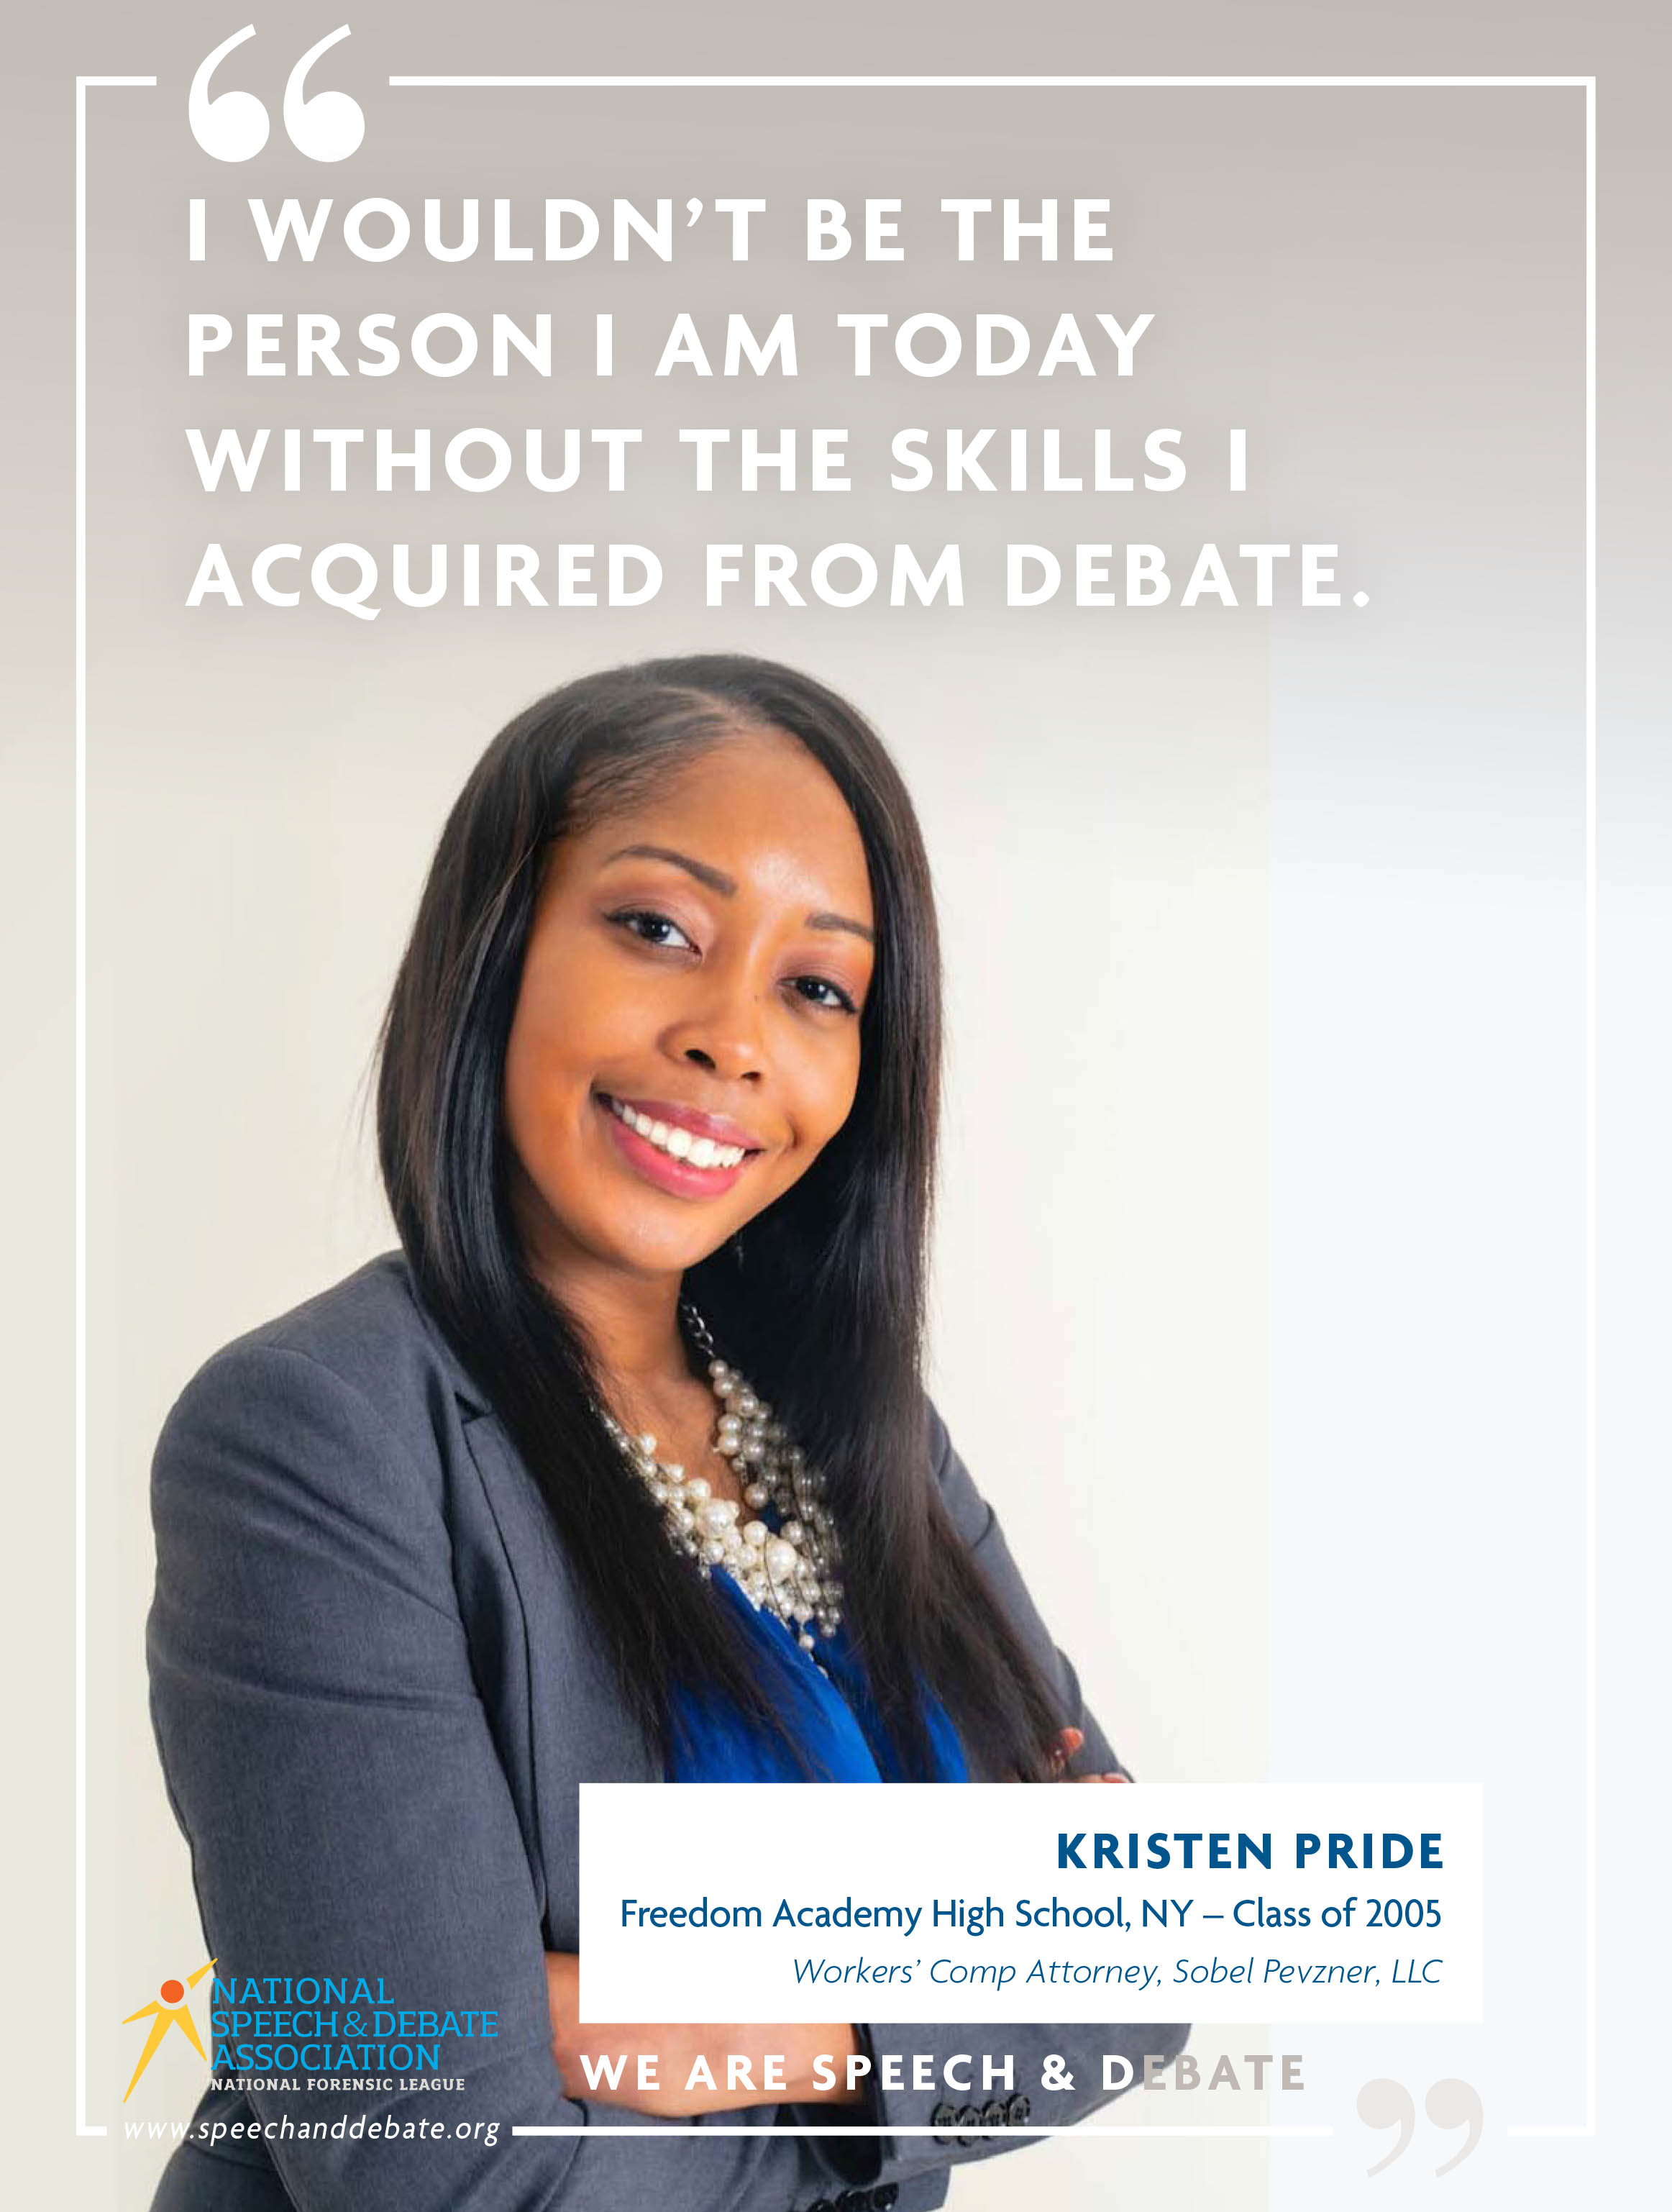 "I WOULDN’T BE THE PERSON I AM TODAY WITHOUT THE SKILLS I ACQUIRED FROM DEBATE." - Kristen Pride